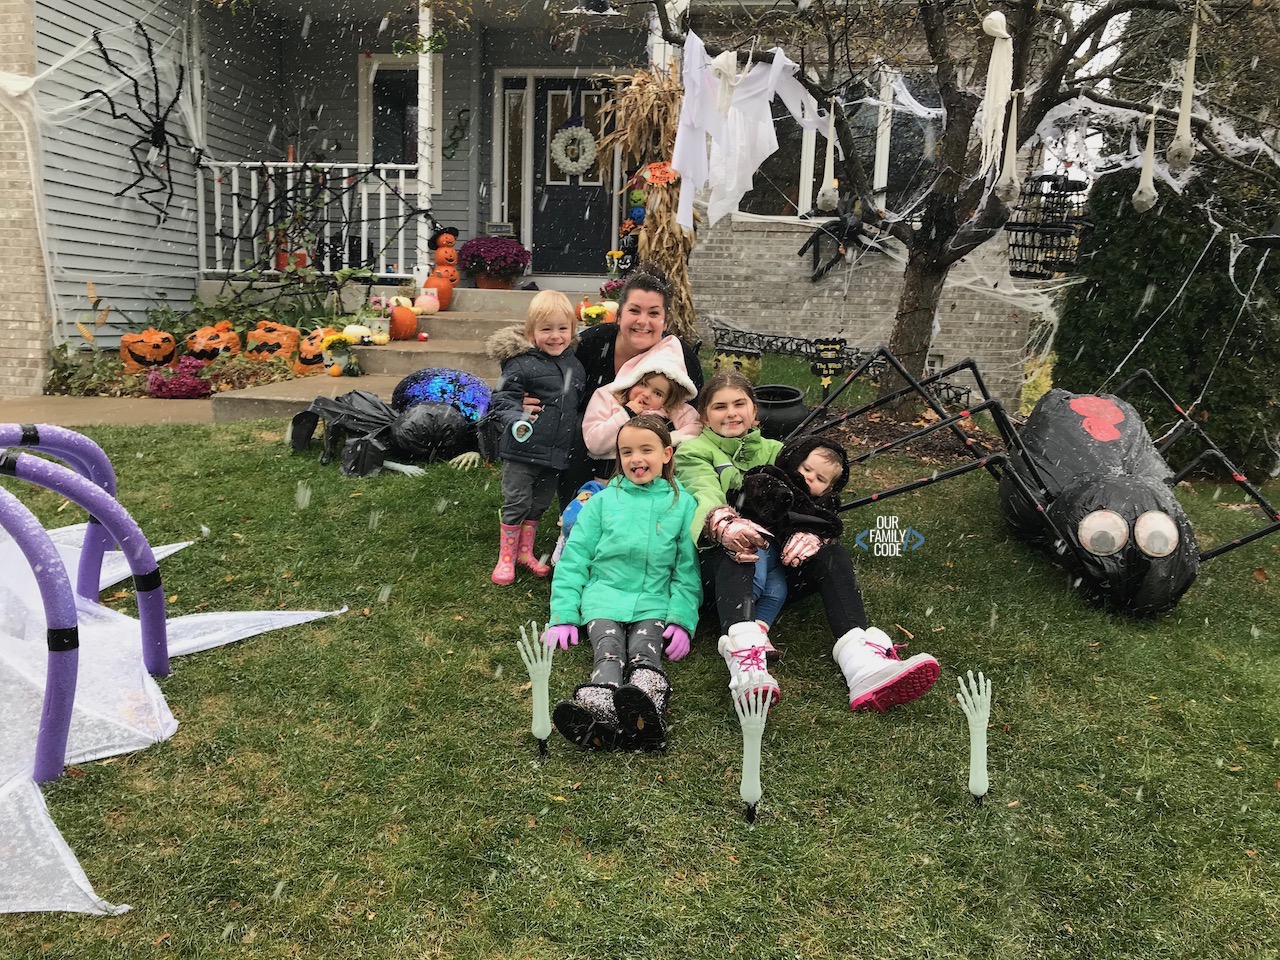 A picture of kids and mom in front of decorated house for Halloween with giant PVC spiders and hanging ghosts.